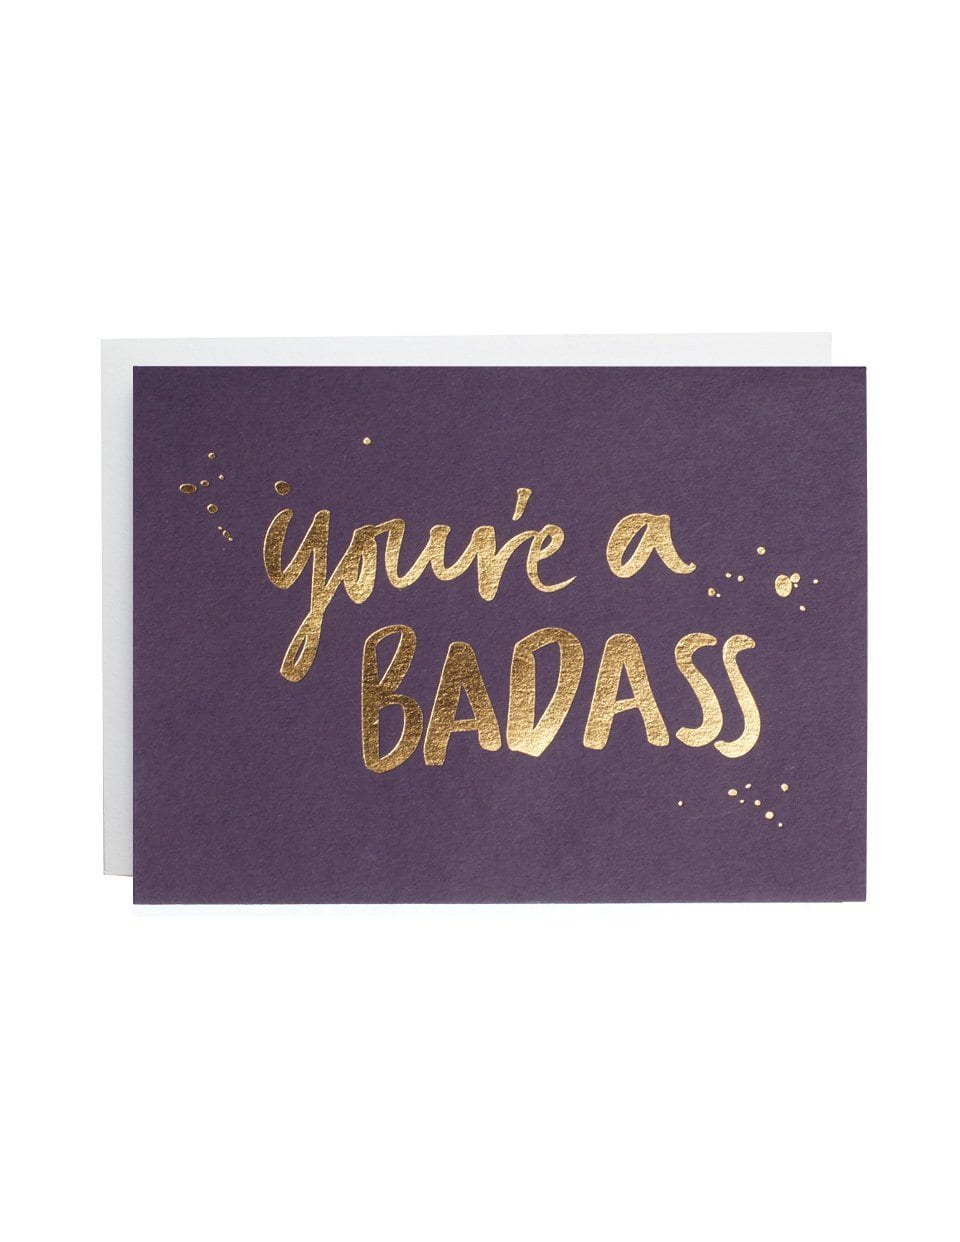 You’re a Badass foiled greeting card